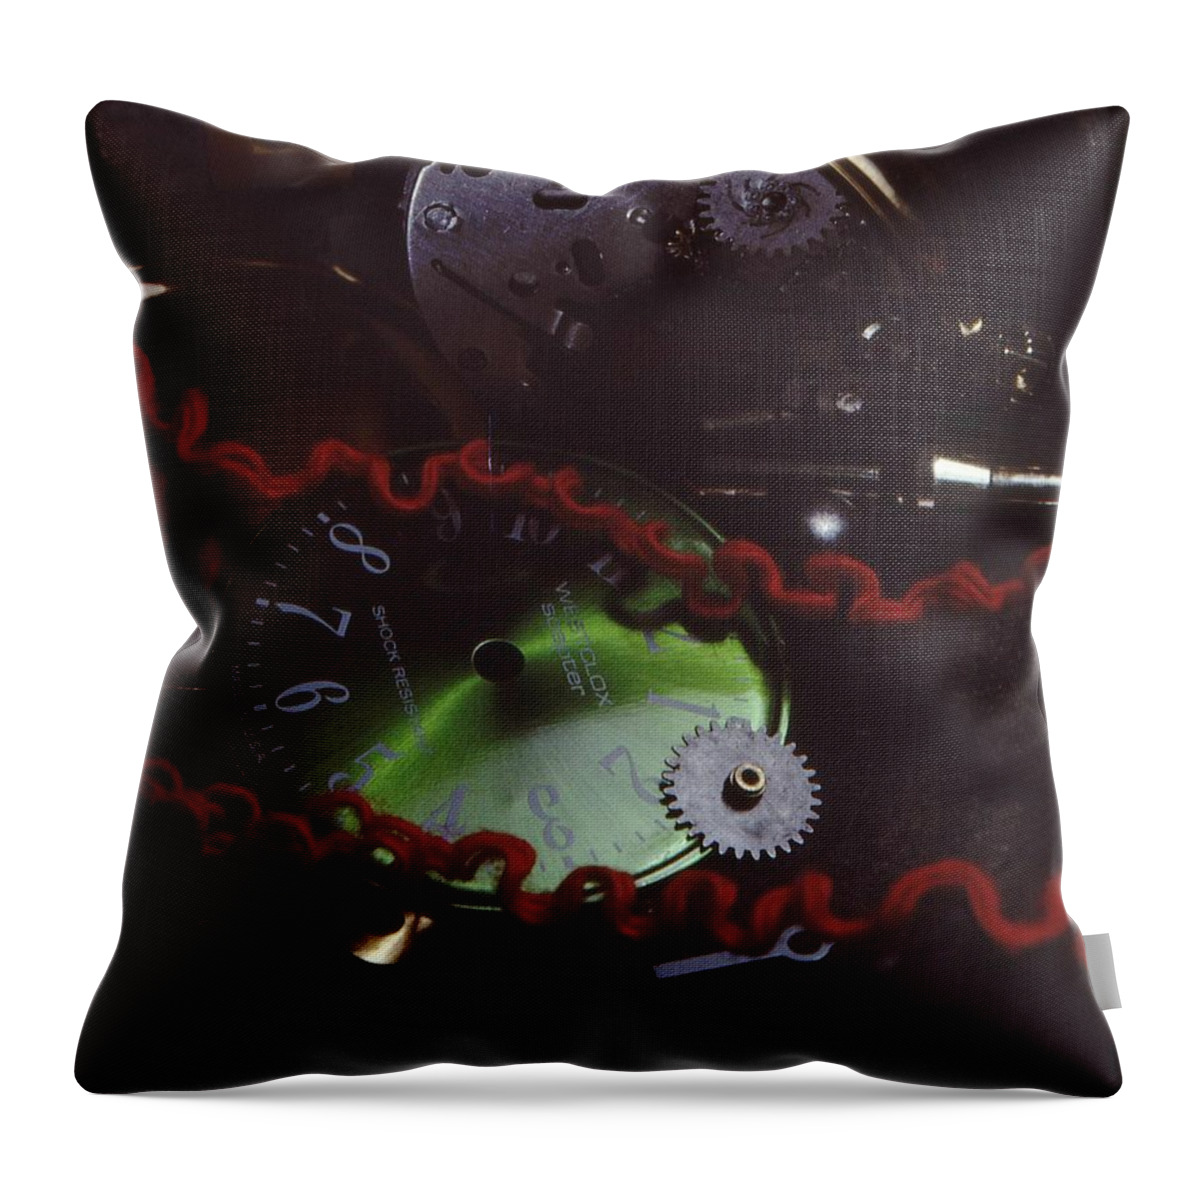 Time Throw Pillow featuring the photograph A Glitch In Time by Don Youngclaus